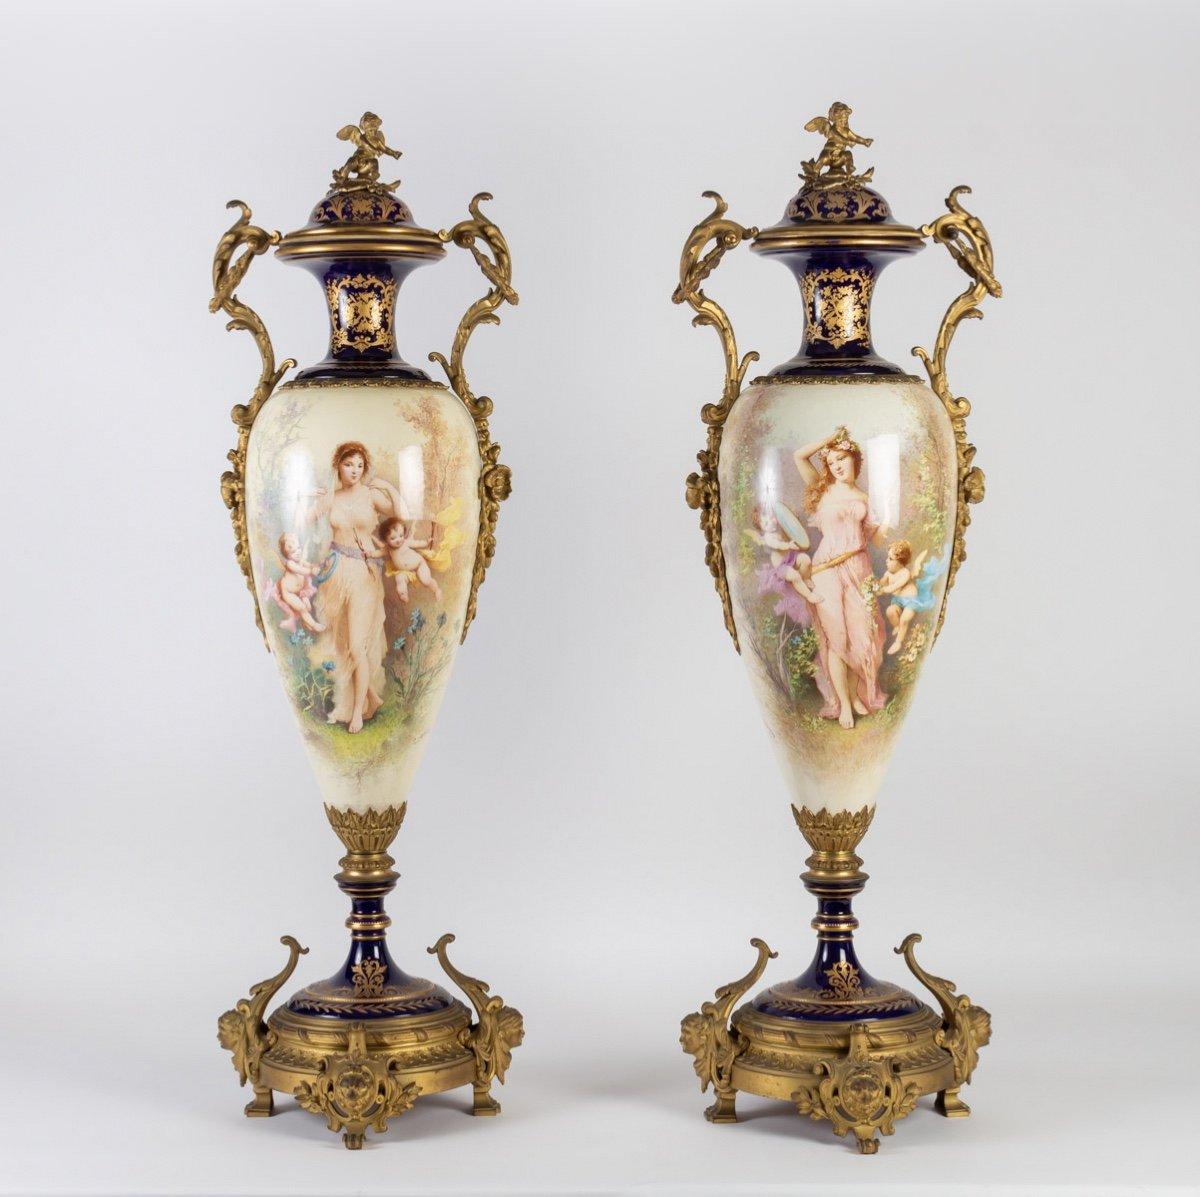 Pair of very Fine Sèvres Porcelain Vases
Very beautiful and important pair of covered vases in polychrome earthenware in the Sèvres white and blue taste with a rich ornamentation in gilt bronzes. The base stands on four feet, two claw feet flanked